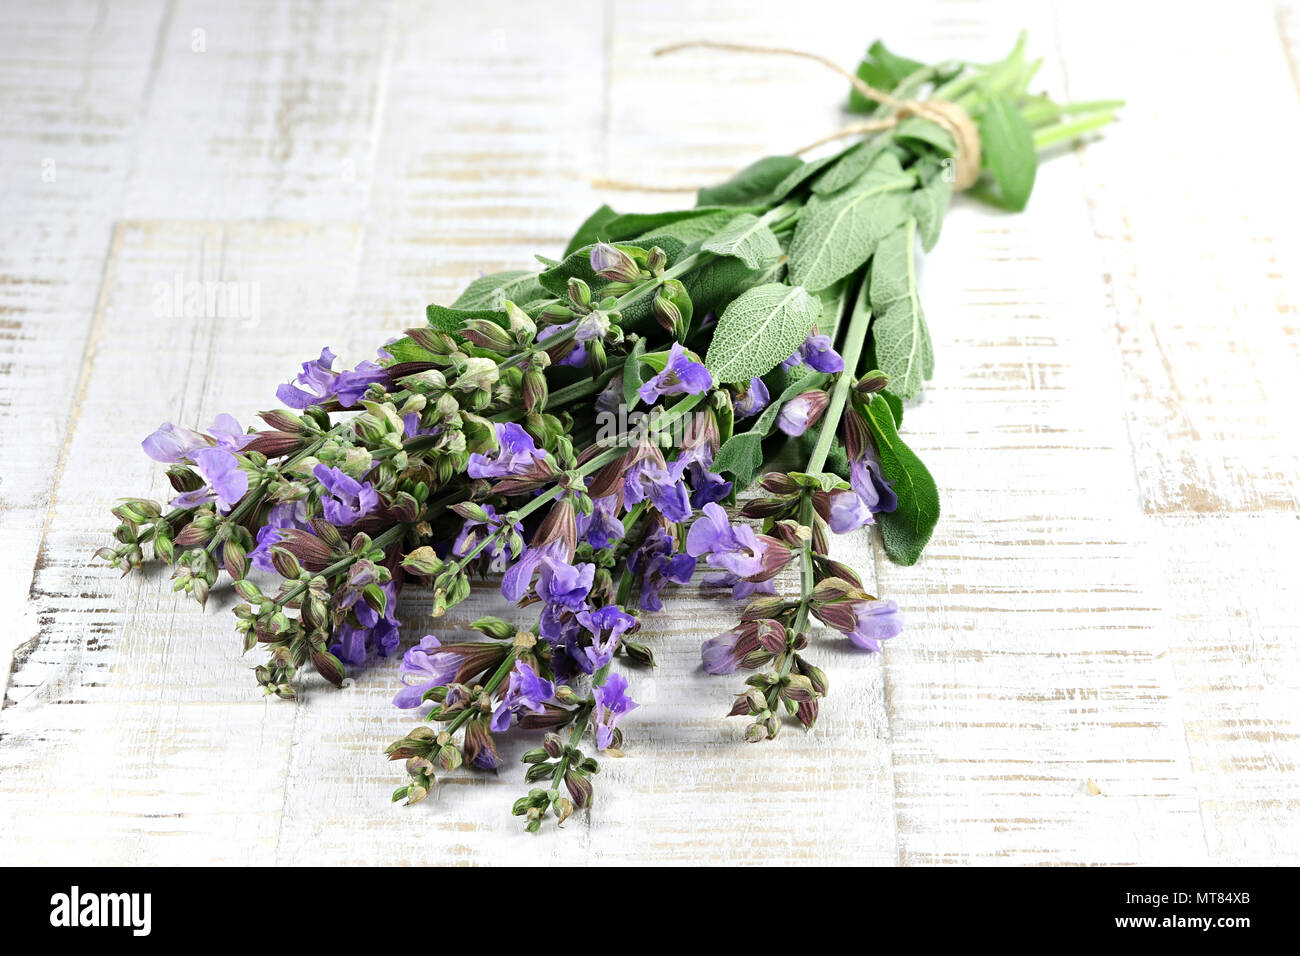 bunch of sage on wooden background Stock Photo